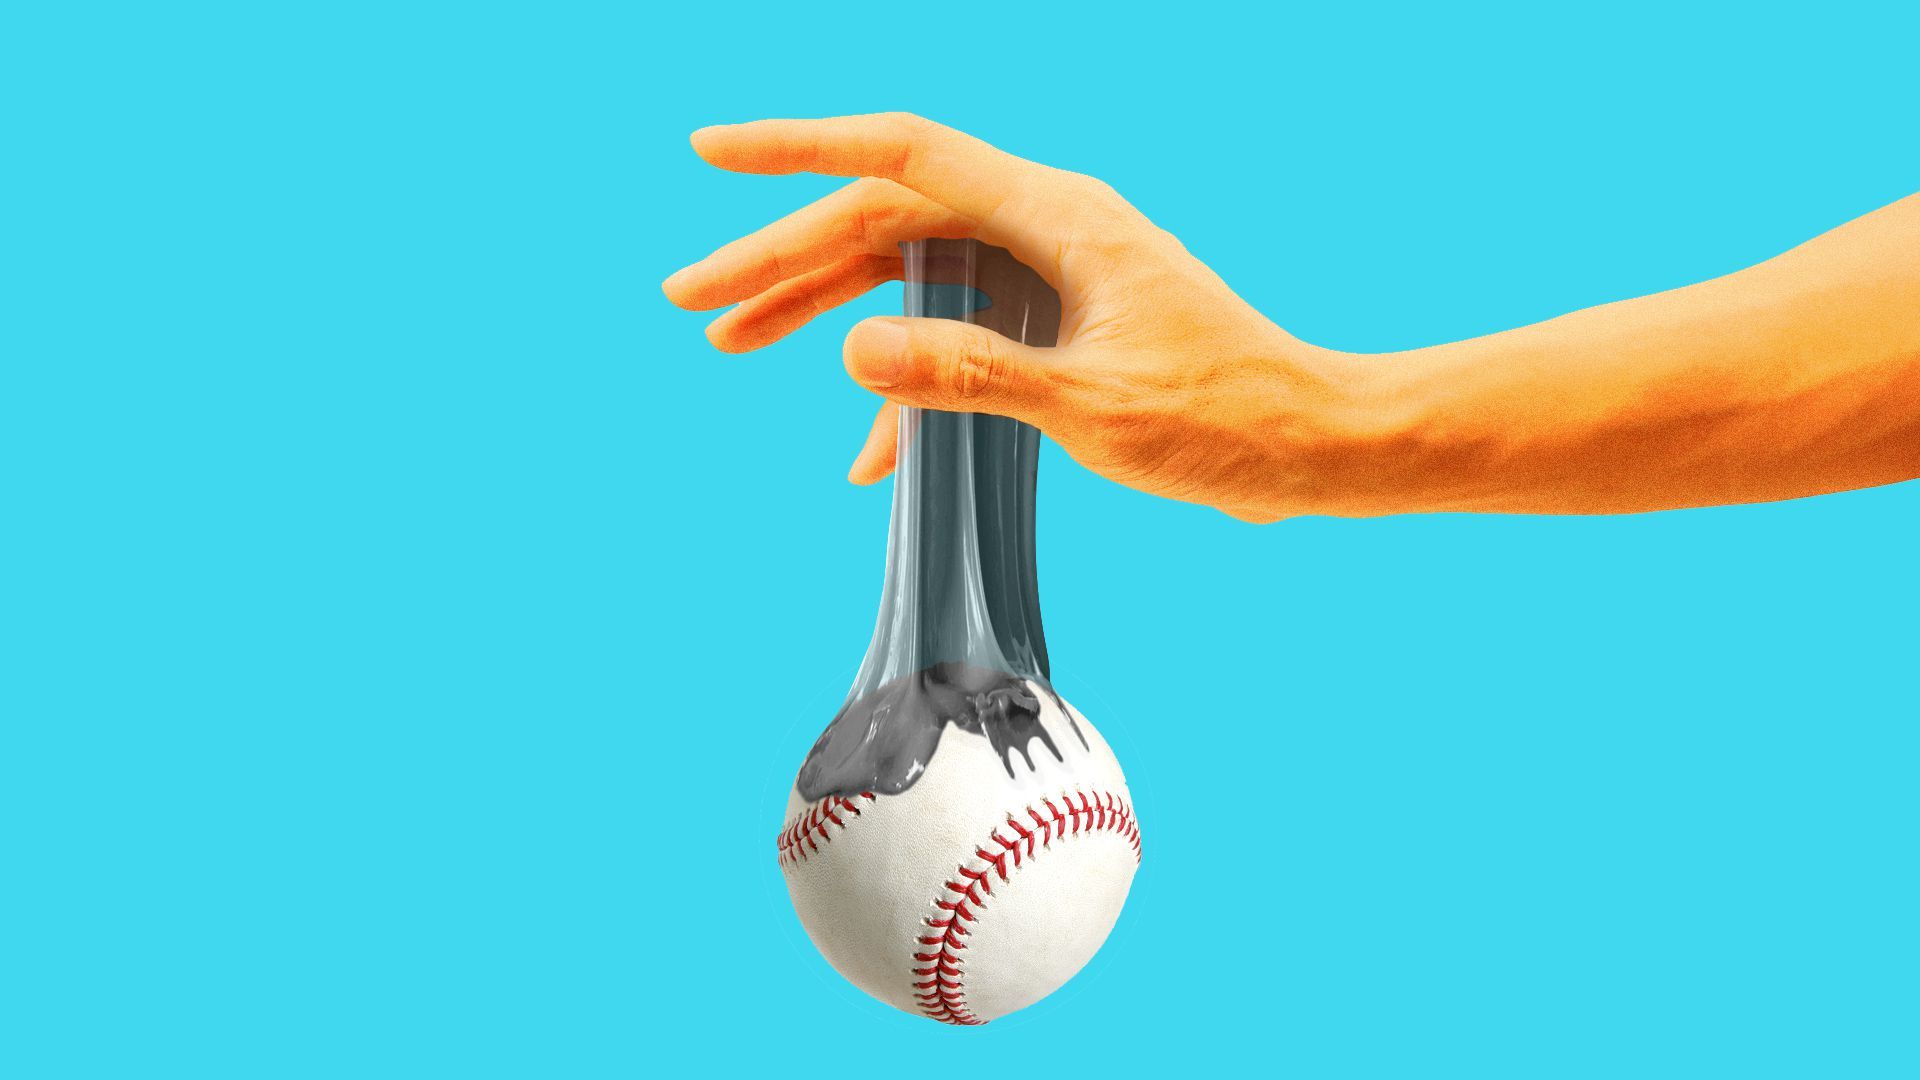 Illustration of a hand holding a ball upside down with a sticky substance going from the ball to the hand.  